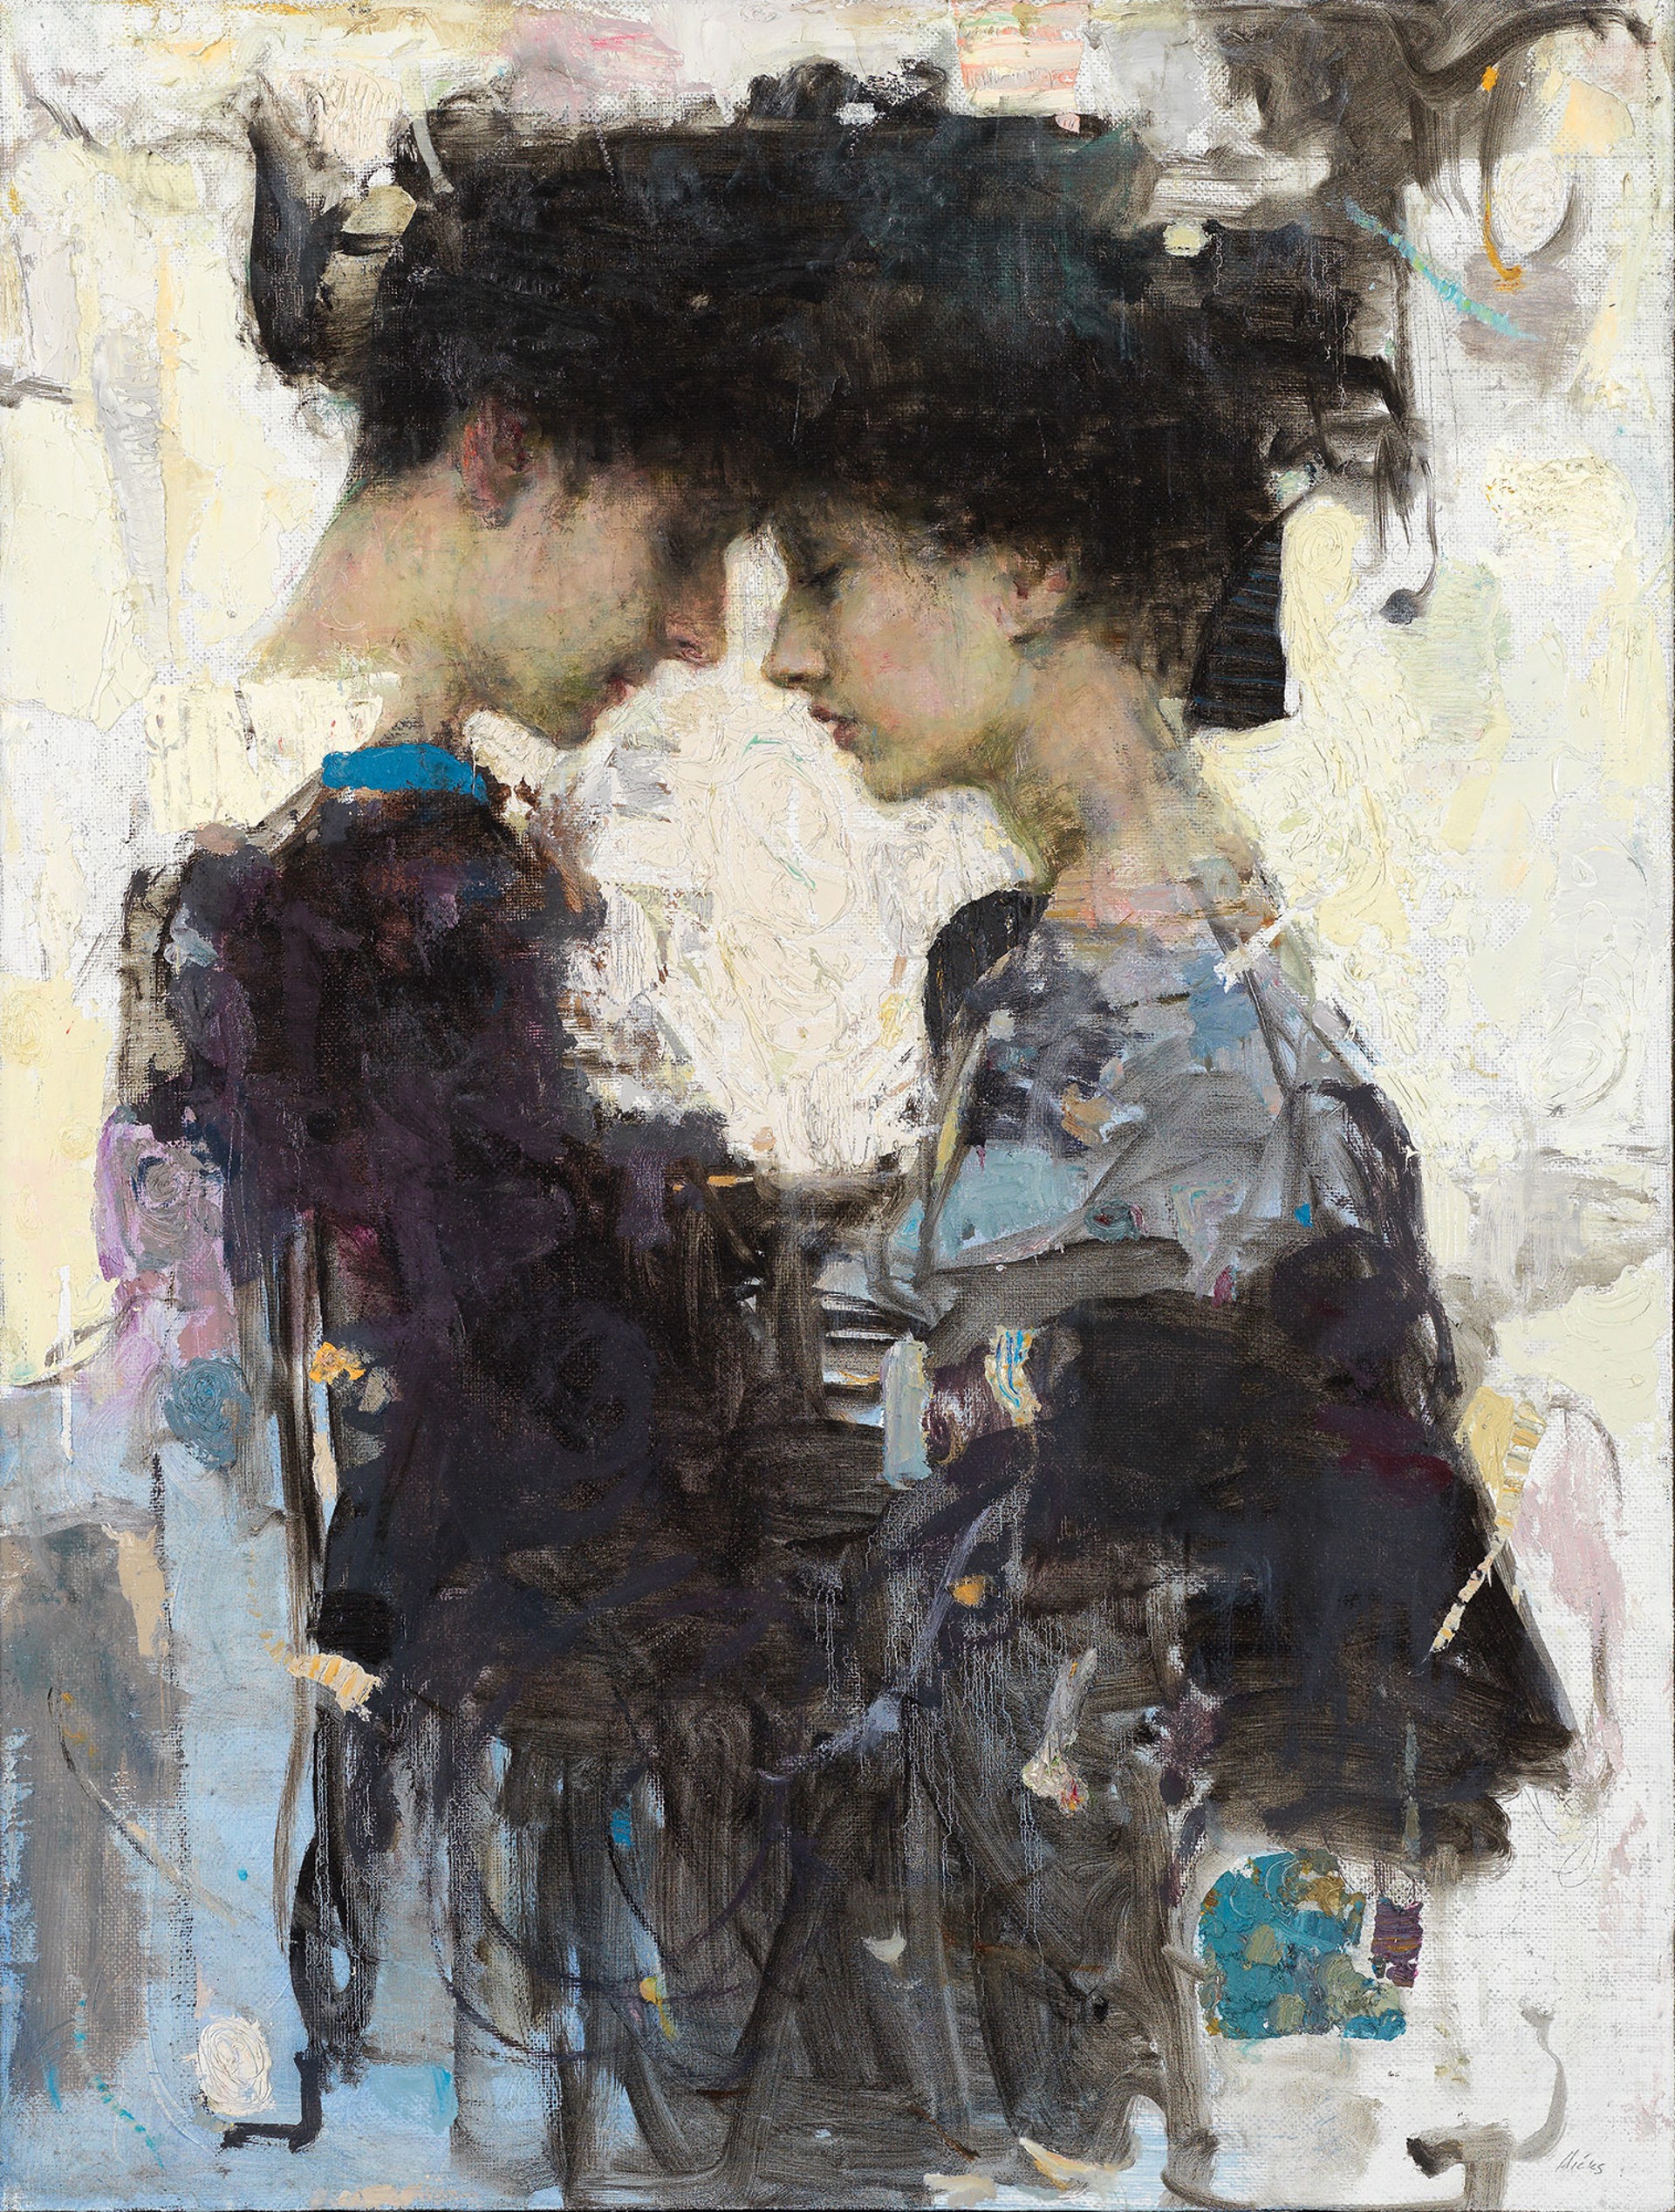 Passionate Ruminations by Ron Hicks